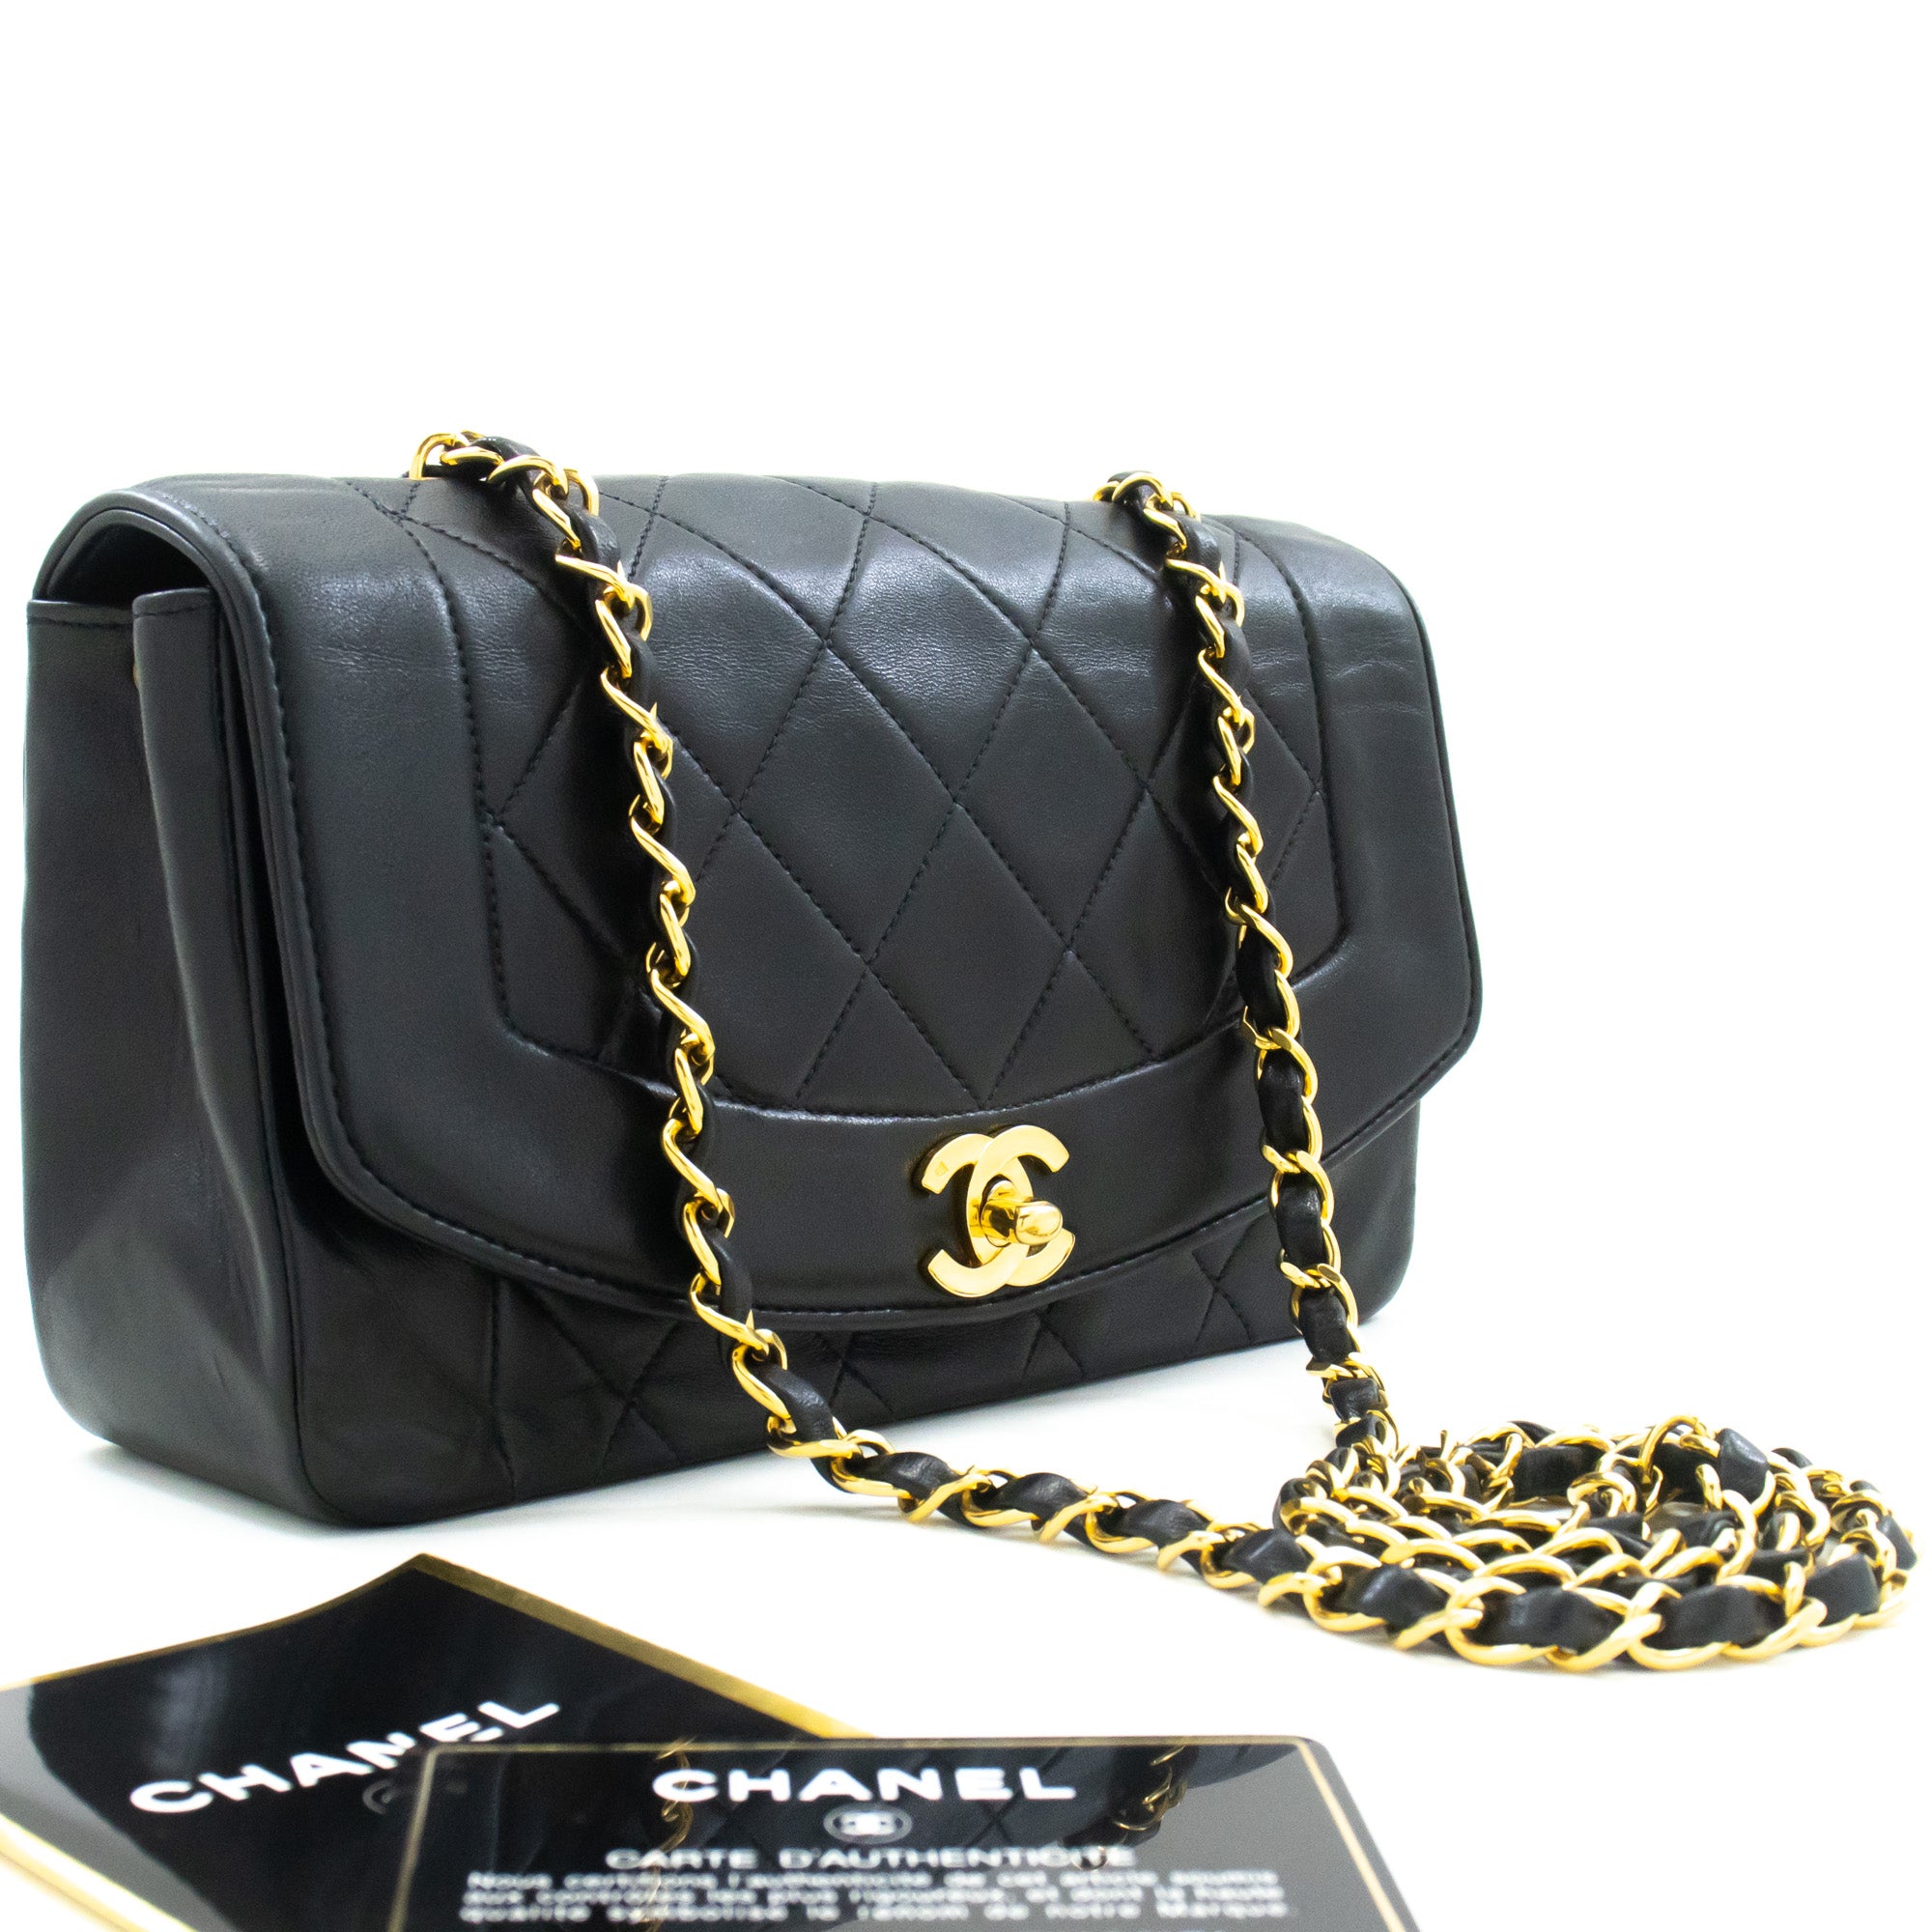 CHANEL Diana Flap Chain Shoulder Bag Black Quilted Lambskin Purse m58